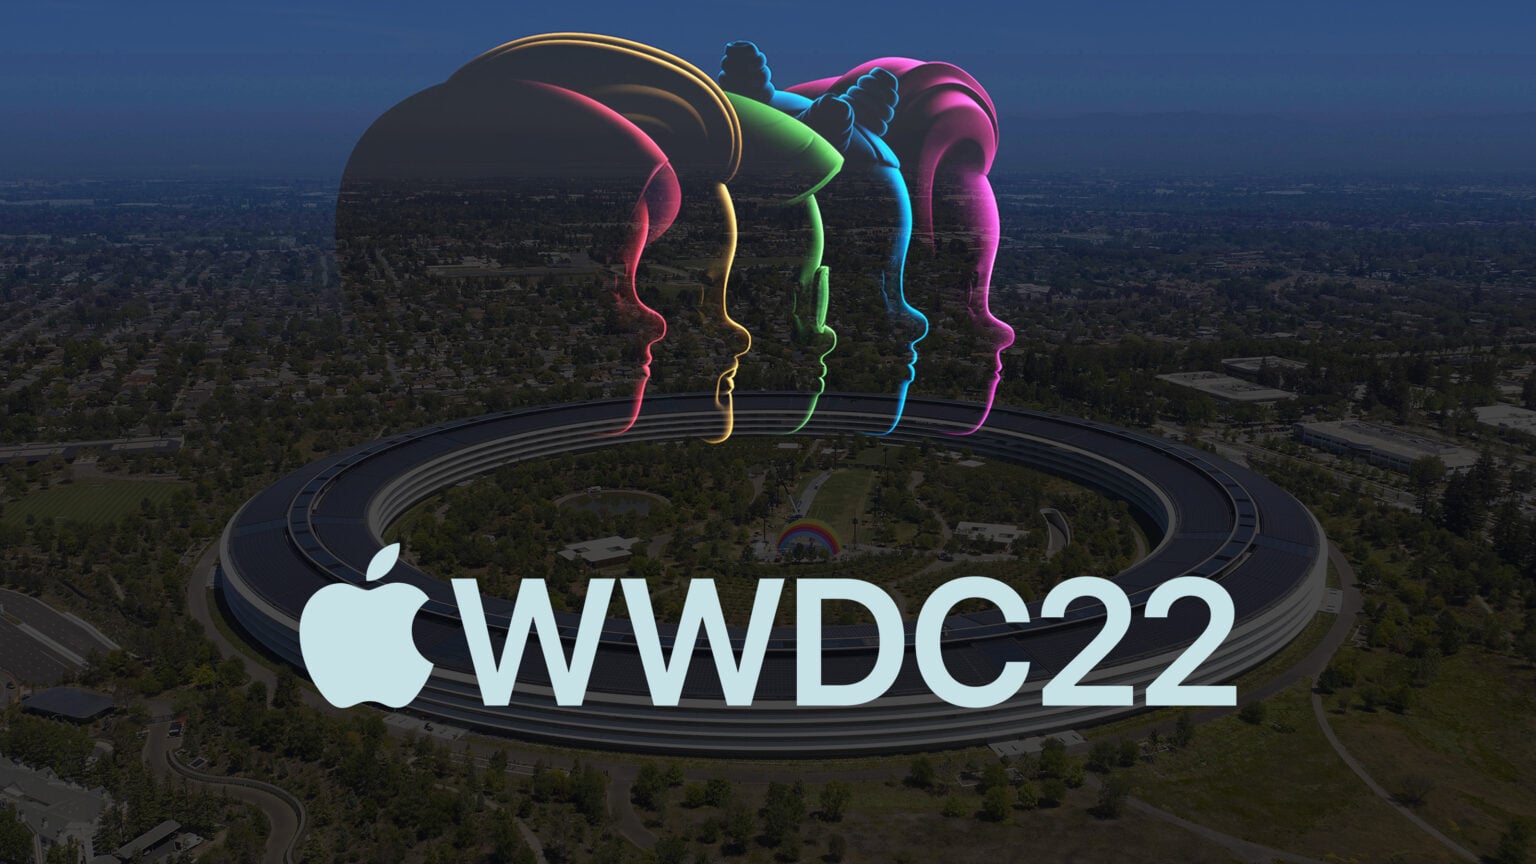 Apple is hosting a limited event at Apple Park for WWDC22.